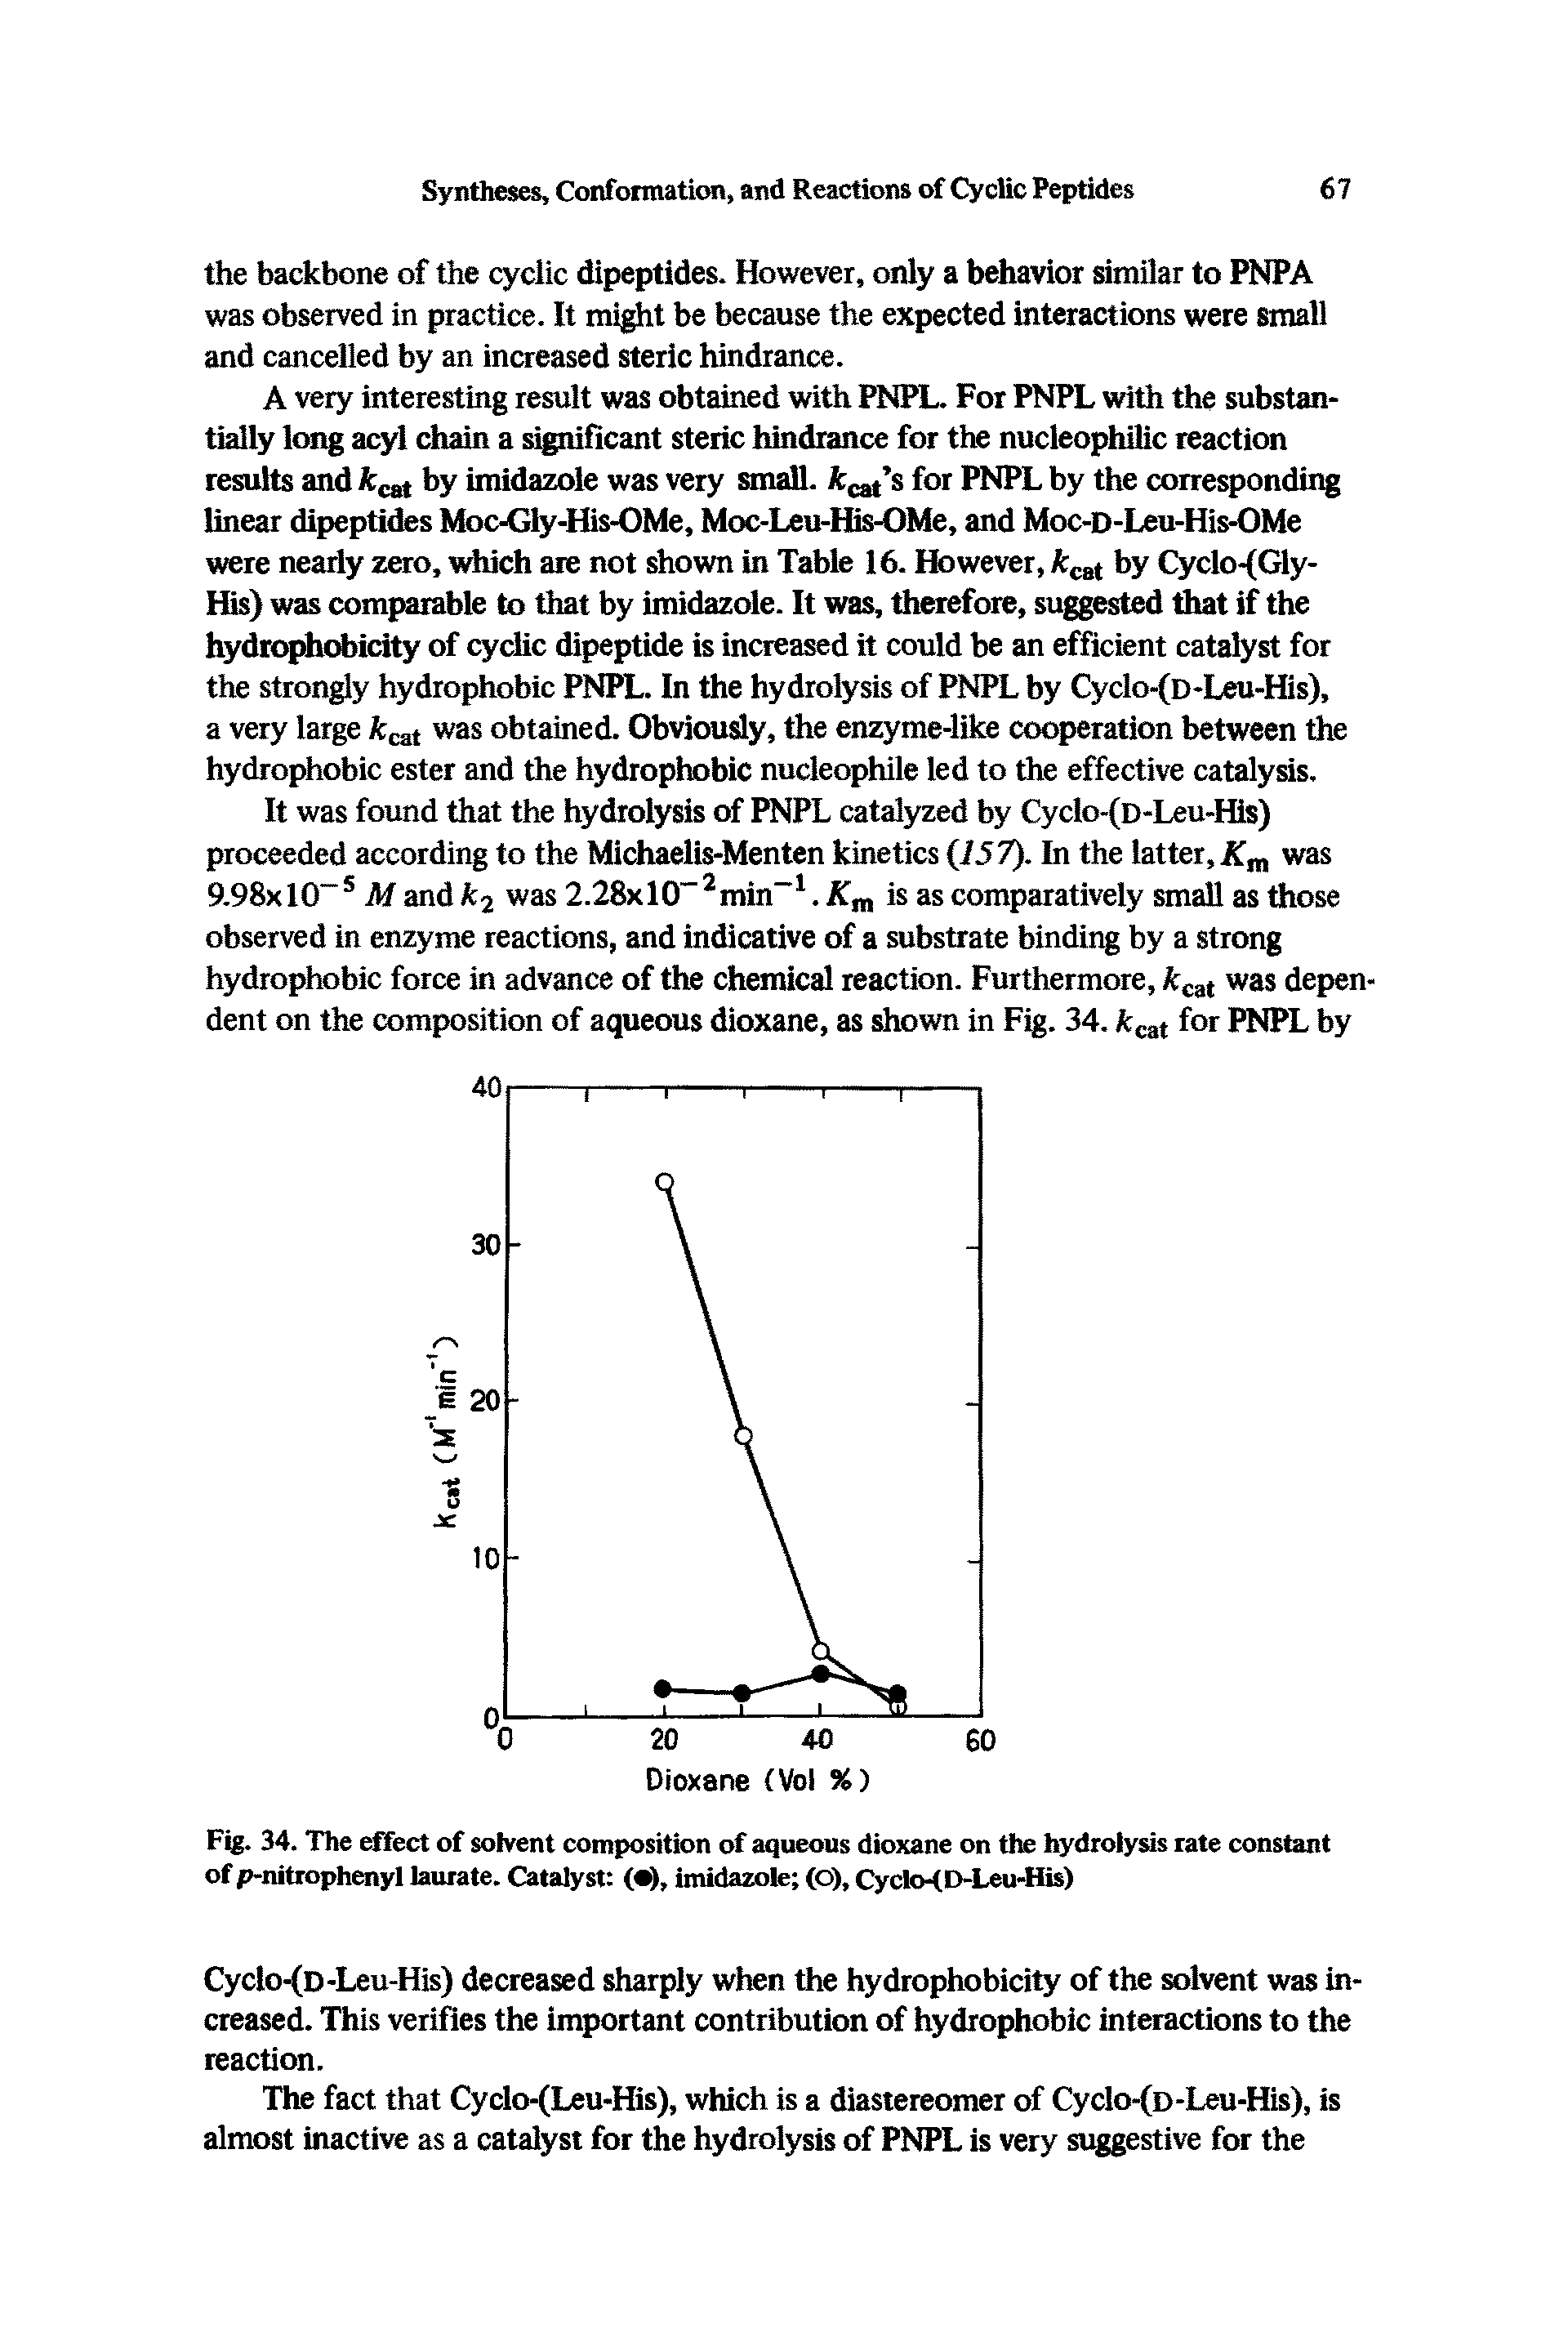 Fig. 34. The effect of solvent composition of aqueous dioxane on the hydrolysis rate constant of p-nitrophenyl laurate. Catalyst ( ), imidazole (o), Cyclo-(D-Leu-His)...